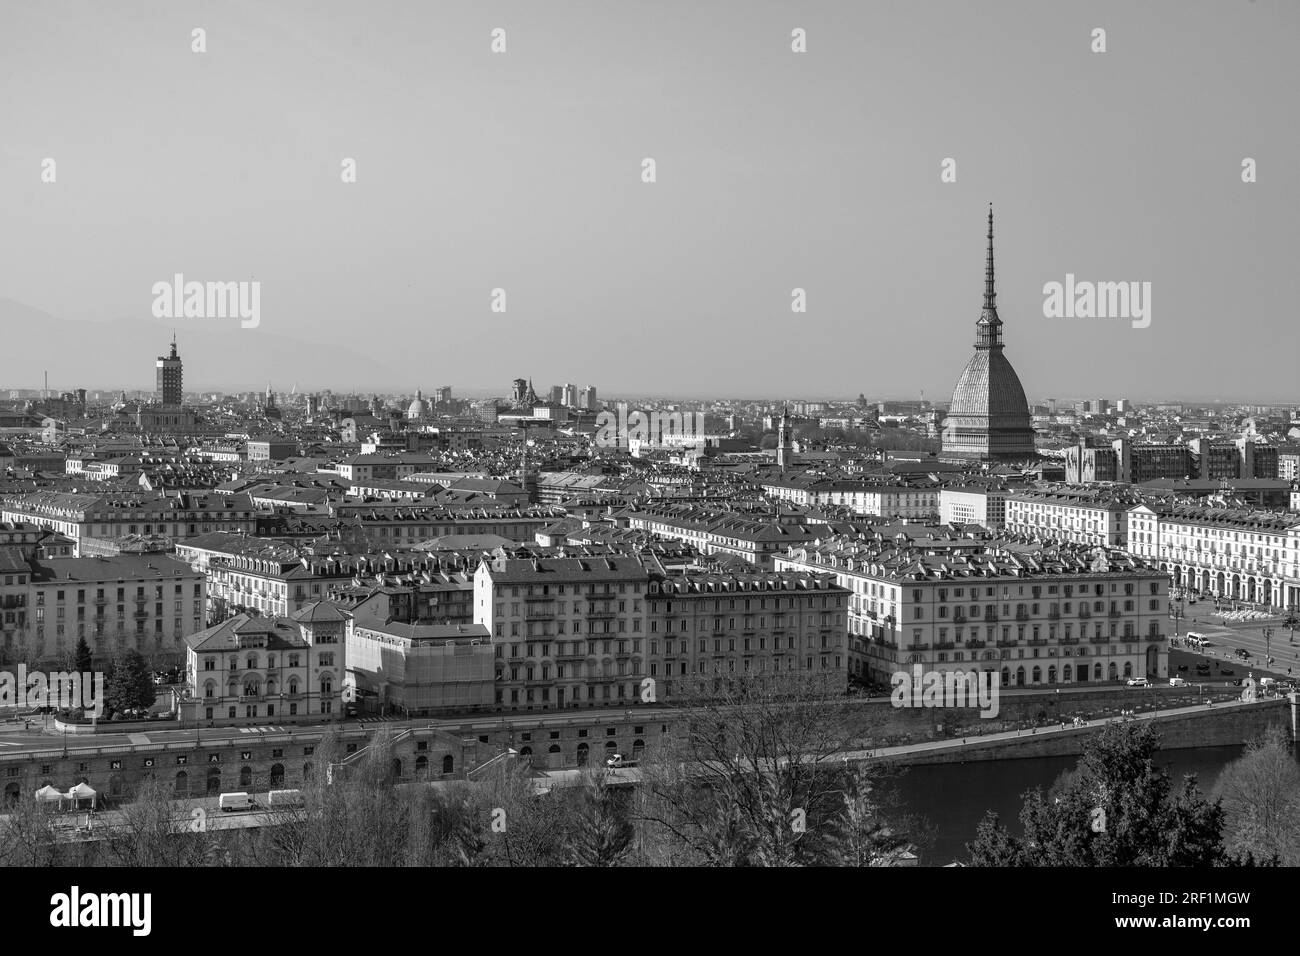 Turin, Italy - March 28, 2022: Aerial view of the Italian city of Turin, the capital of the Piedmont region. Stock Photo